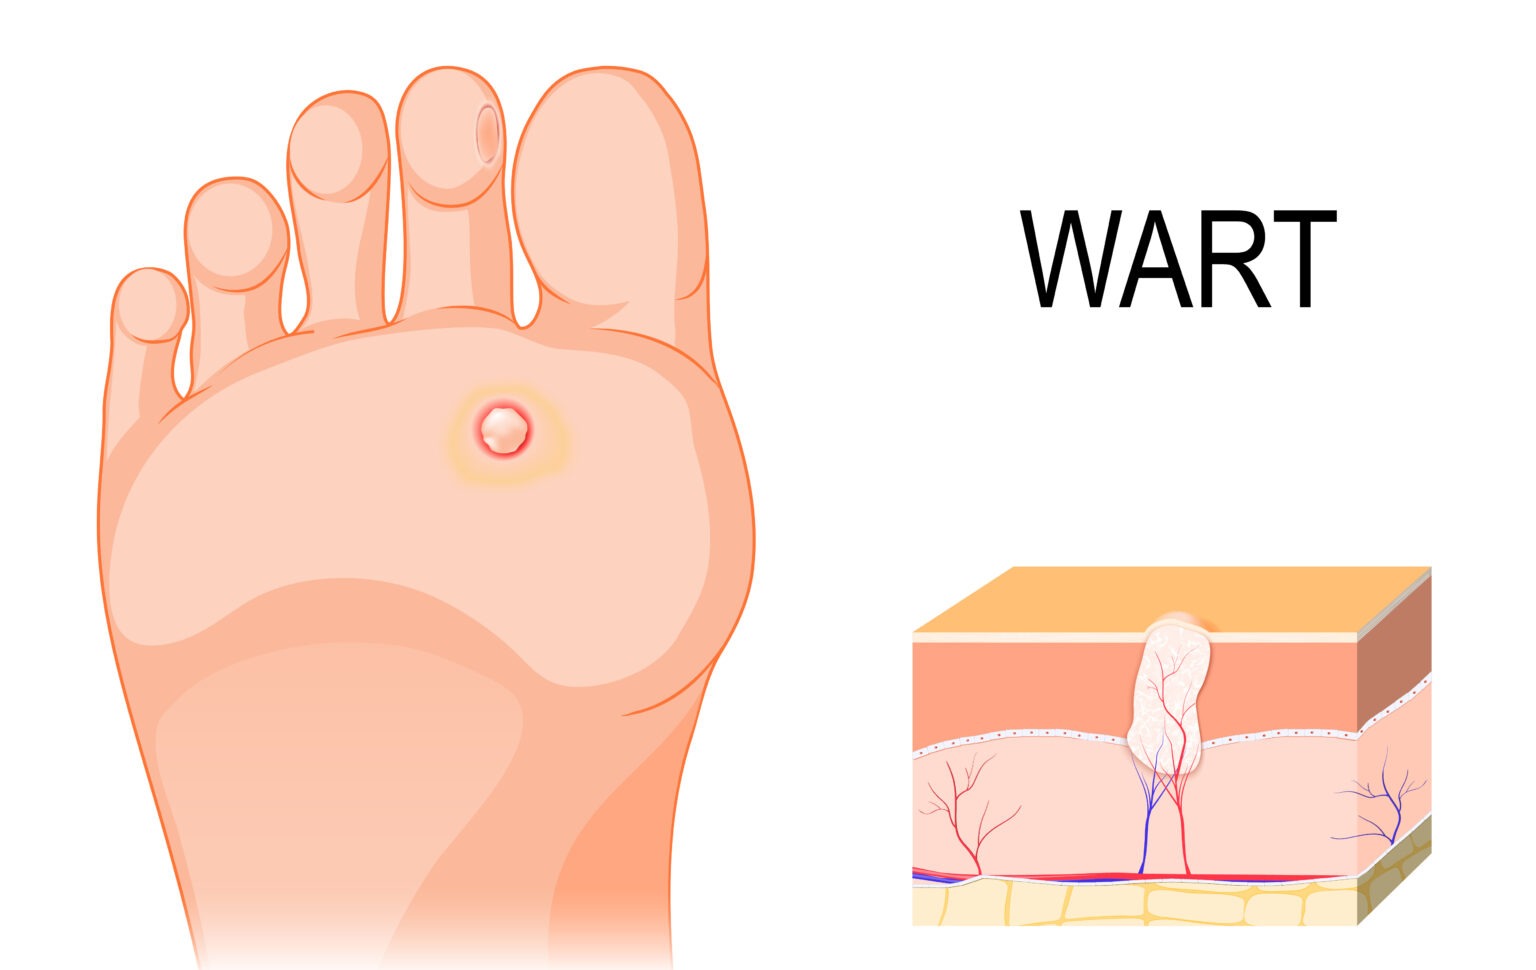 wart-at-the-bottom-of-the-foot